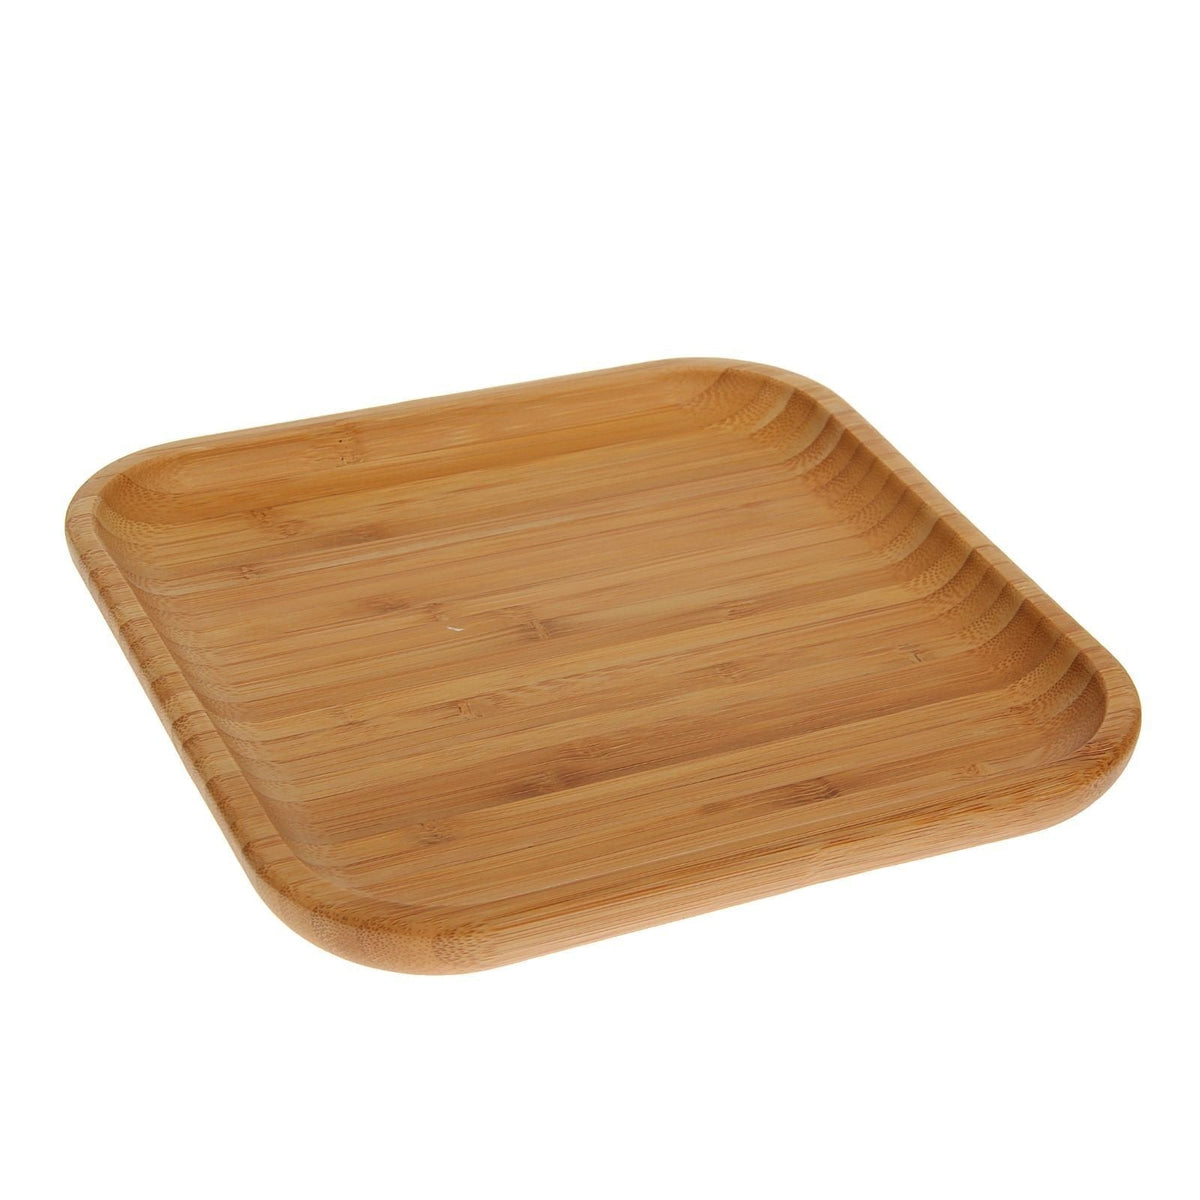 Wilmax Natural Bamboo Plate 8" X 8" | 20,5 Cm X 20.5 Cm SKU: WL-771021/A